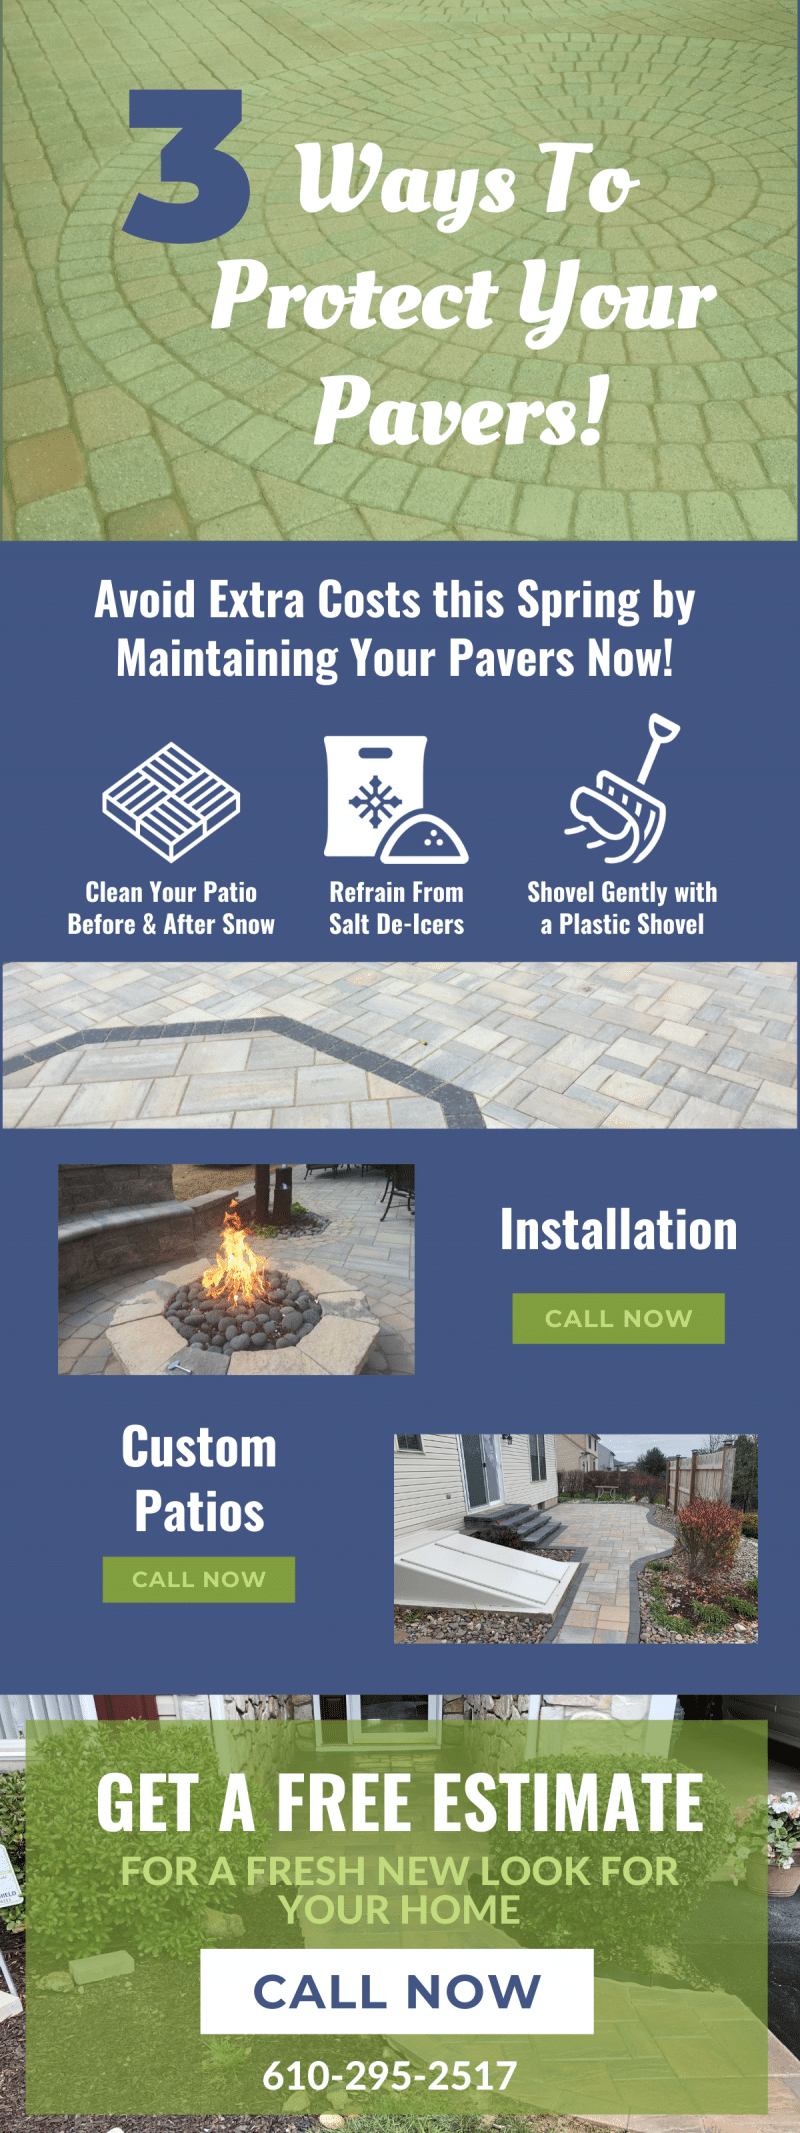 3 Ways to Protect Your Pavers! 1